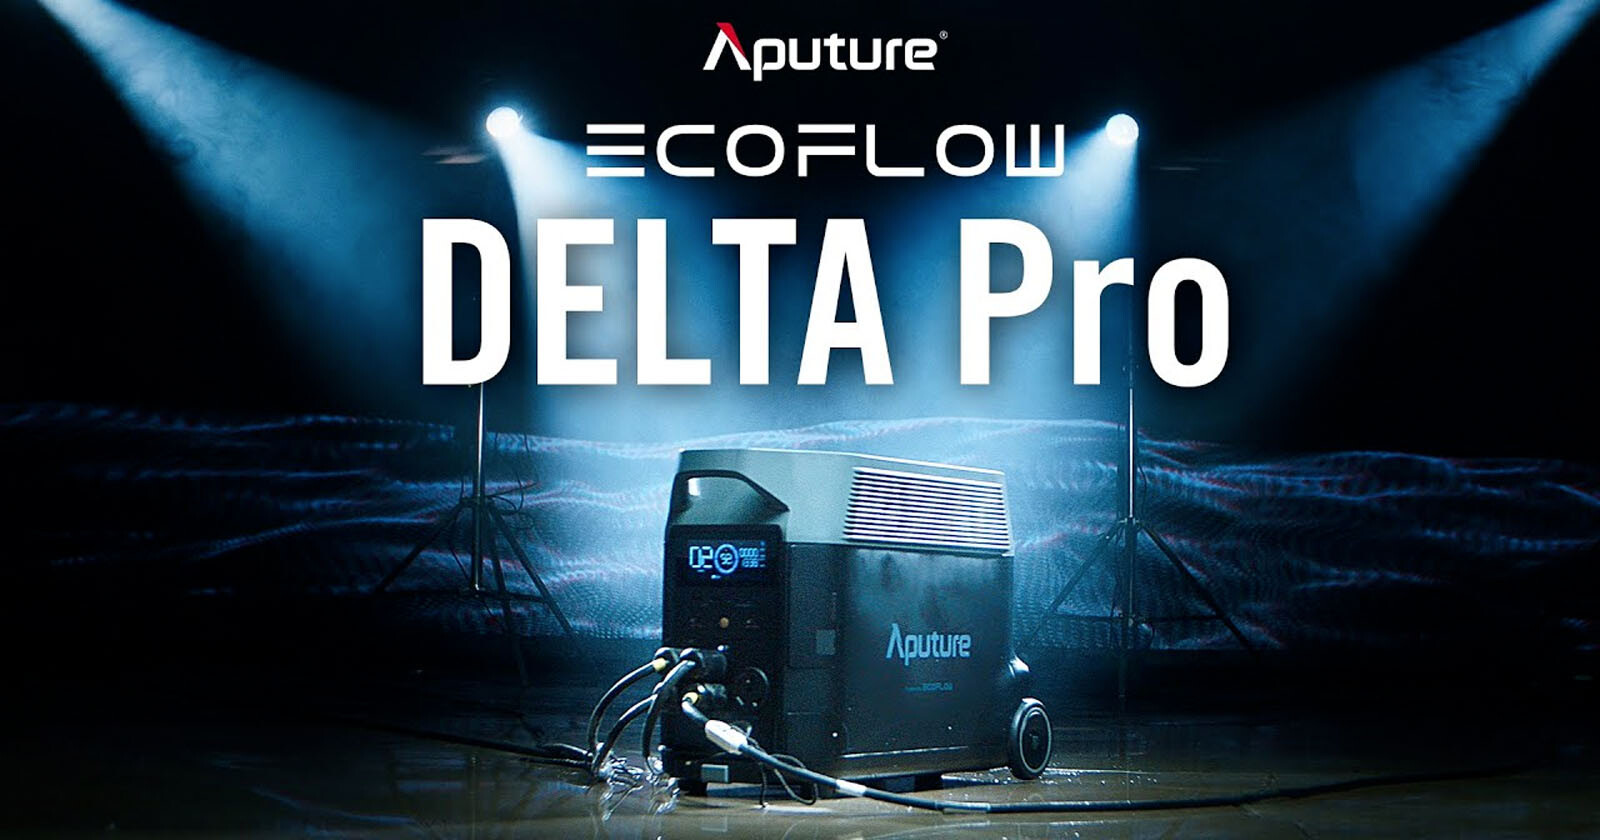 The Aputure Delta Pro is a 3,600Wh Battery for Mobile Film Production